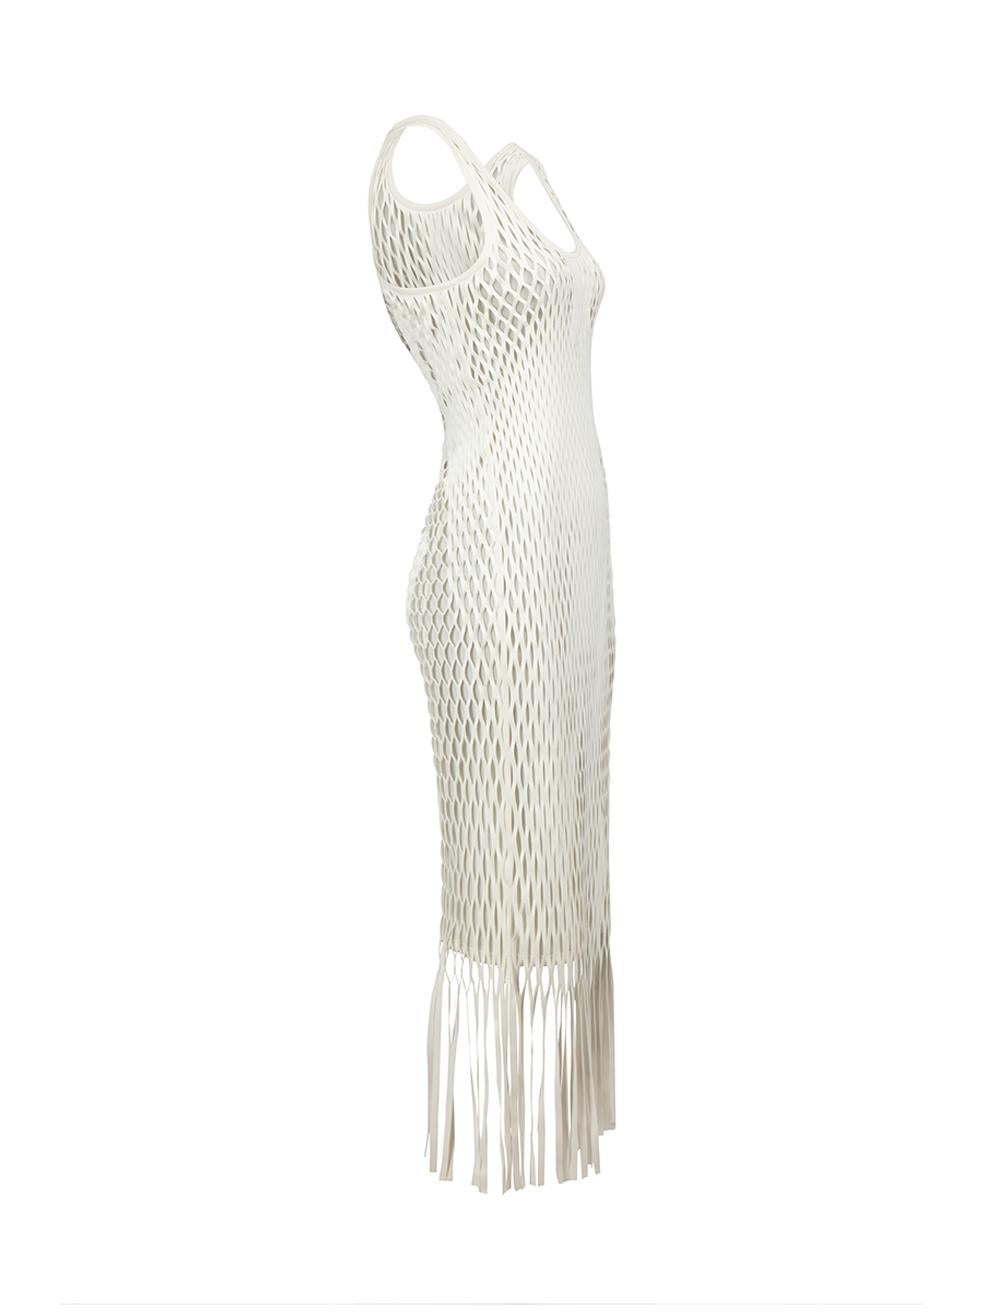 CONDITION is Very good. Minimal wear to dress is evident. Minimal wear to the left-underarm with unstitching of the trim on this used Dion Lee designer resale item.



Details


White

Polyester

Midi dress

Cut-out net design

Sleeveless

Round